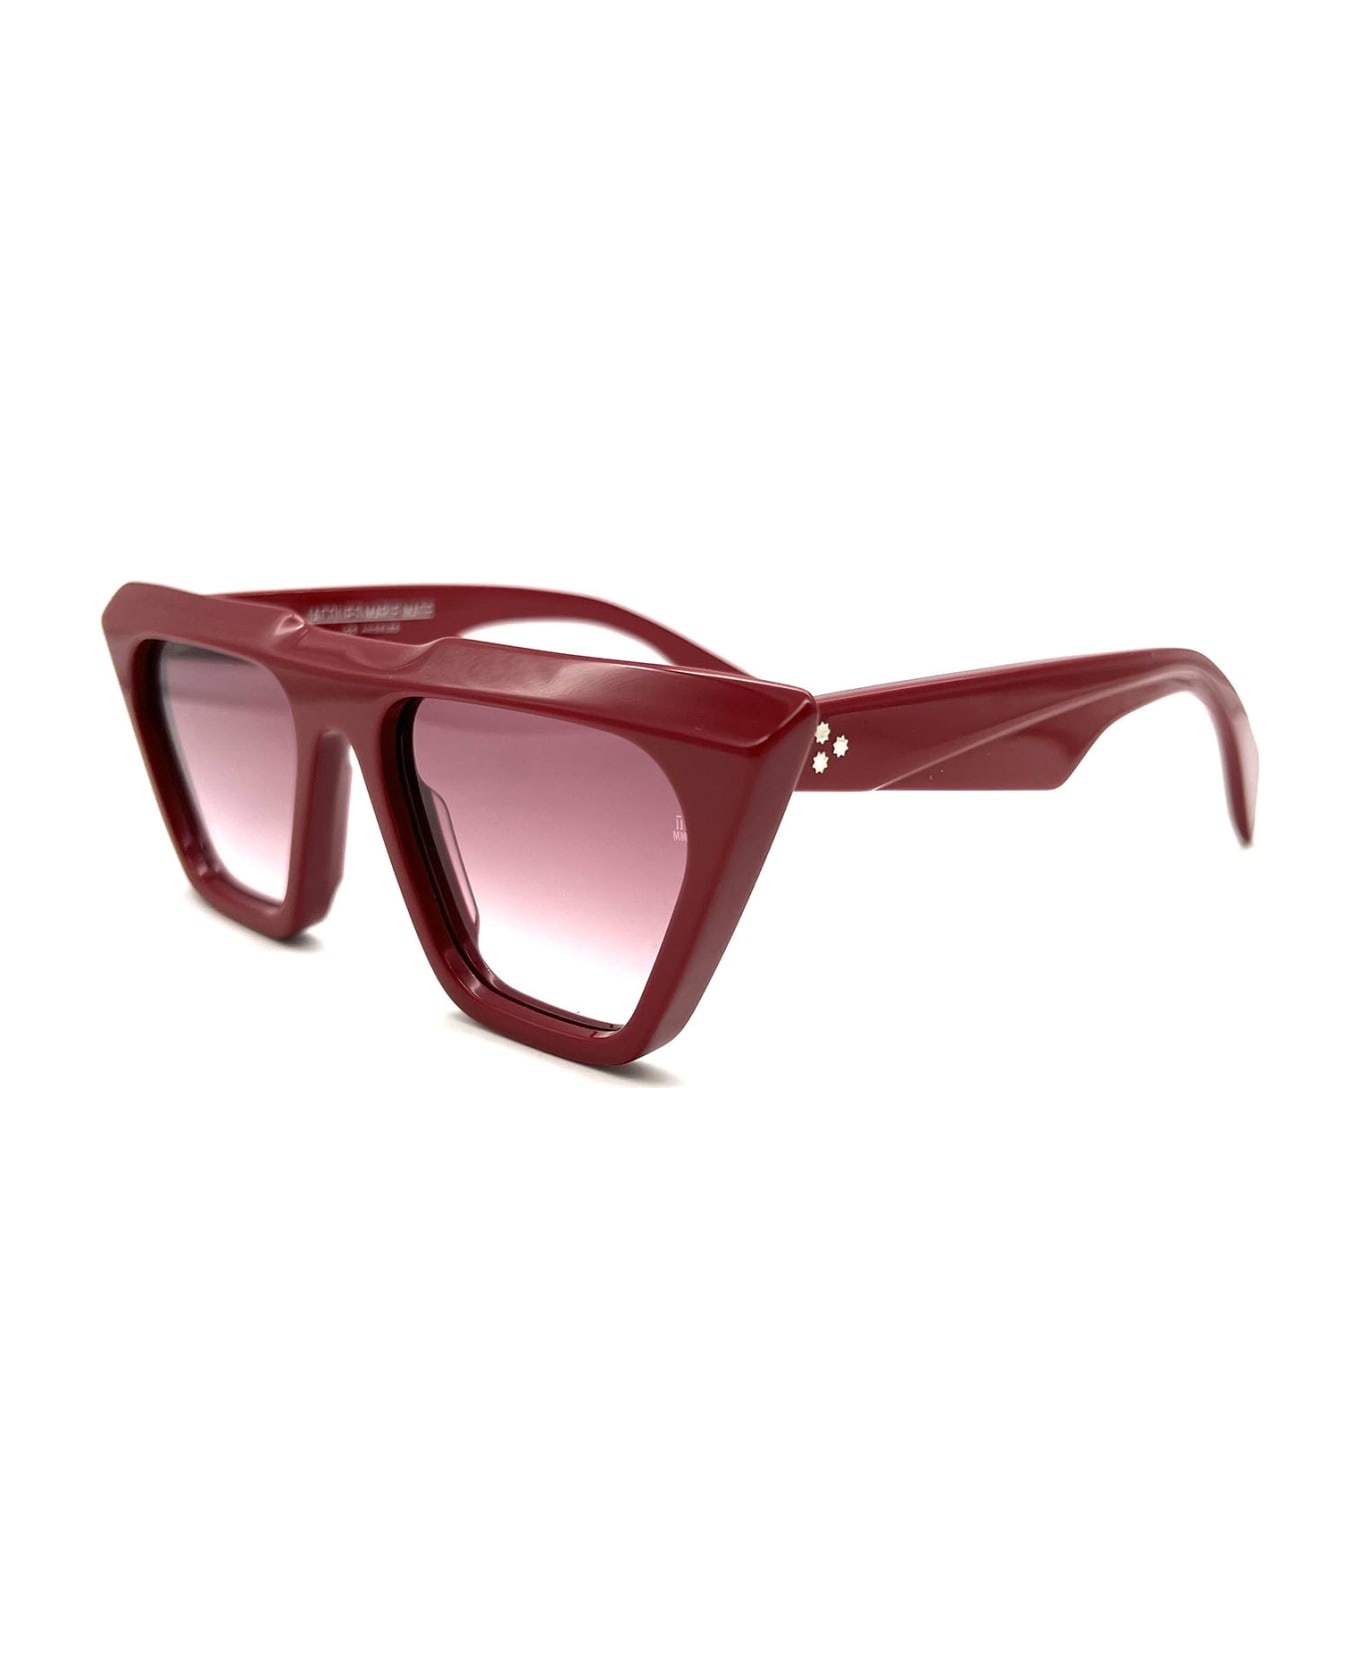 Jacques Marie Mage EVA Sunglasses - M Ruby,maroon G.